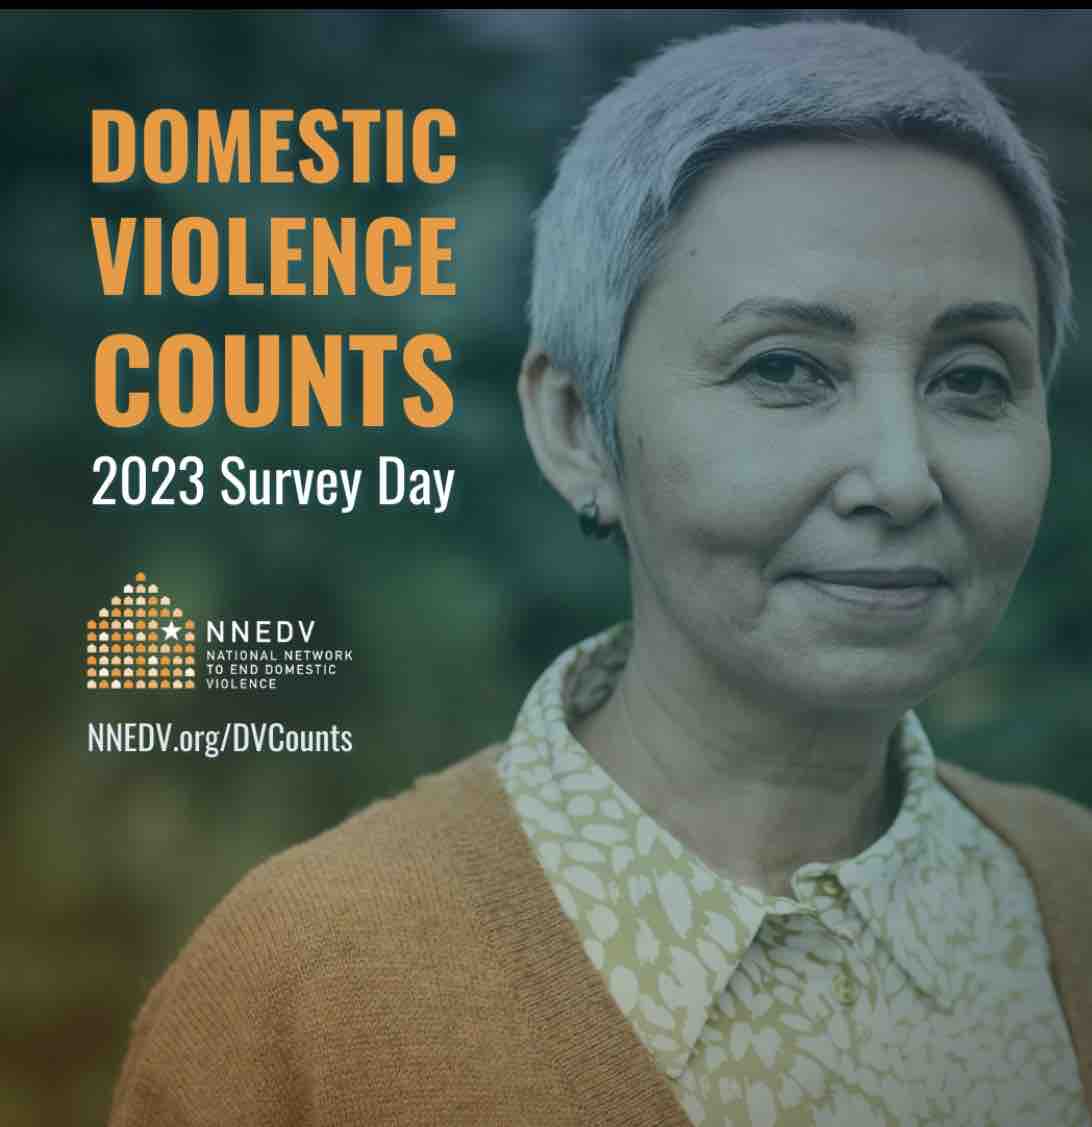 Every day, domestic violence survivors access essential programs and services. NNEDV’s #DVCounts survey helps tell the stories behind the numbers. 

The count shows the services survivors seek in a 24-hour period. Every survivor has a story, and we’re excited to participate.